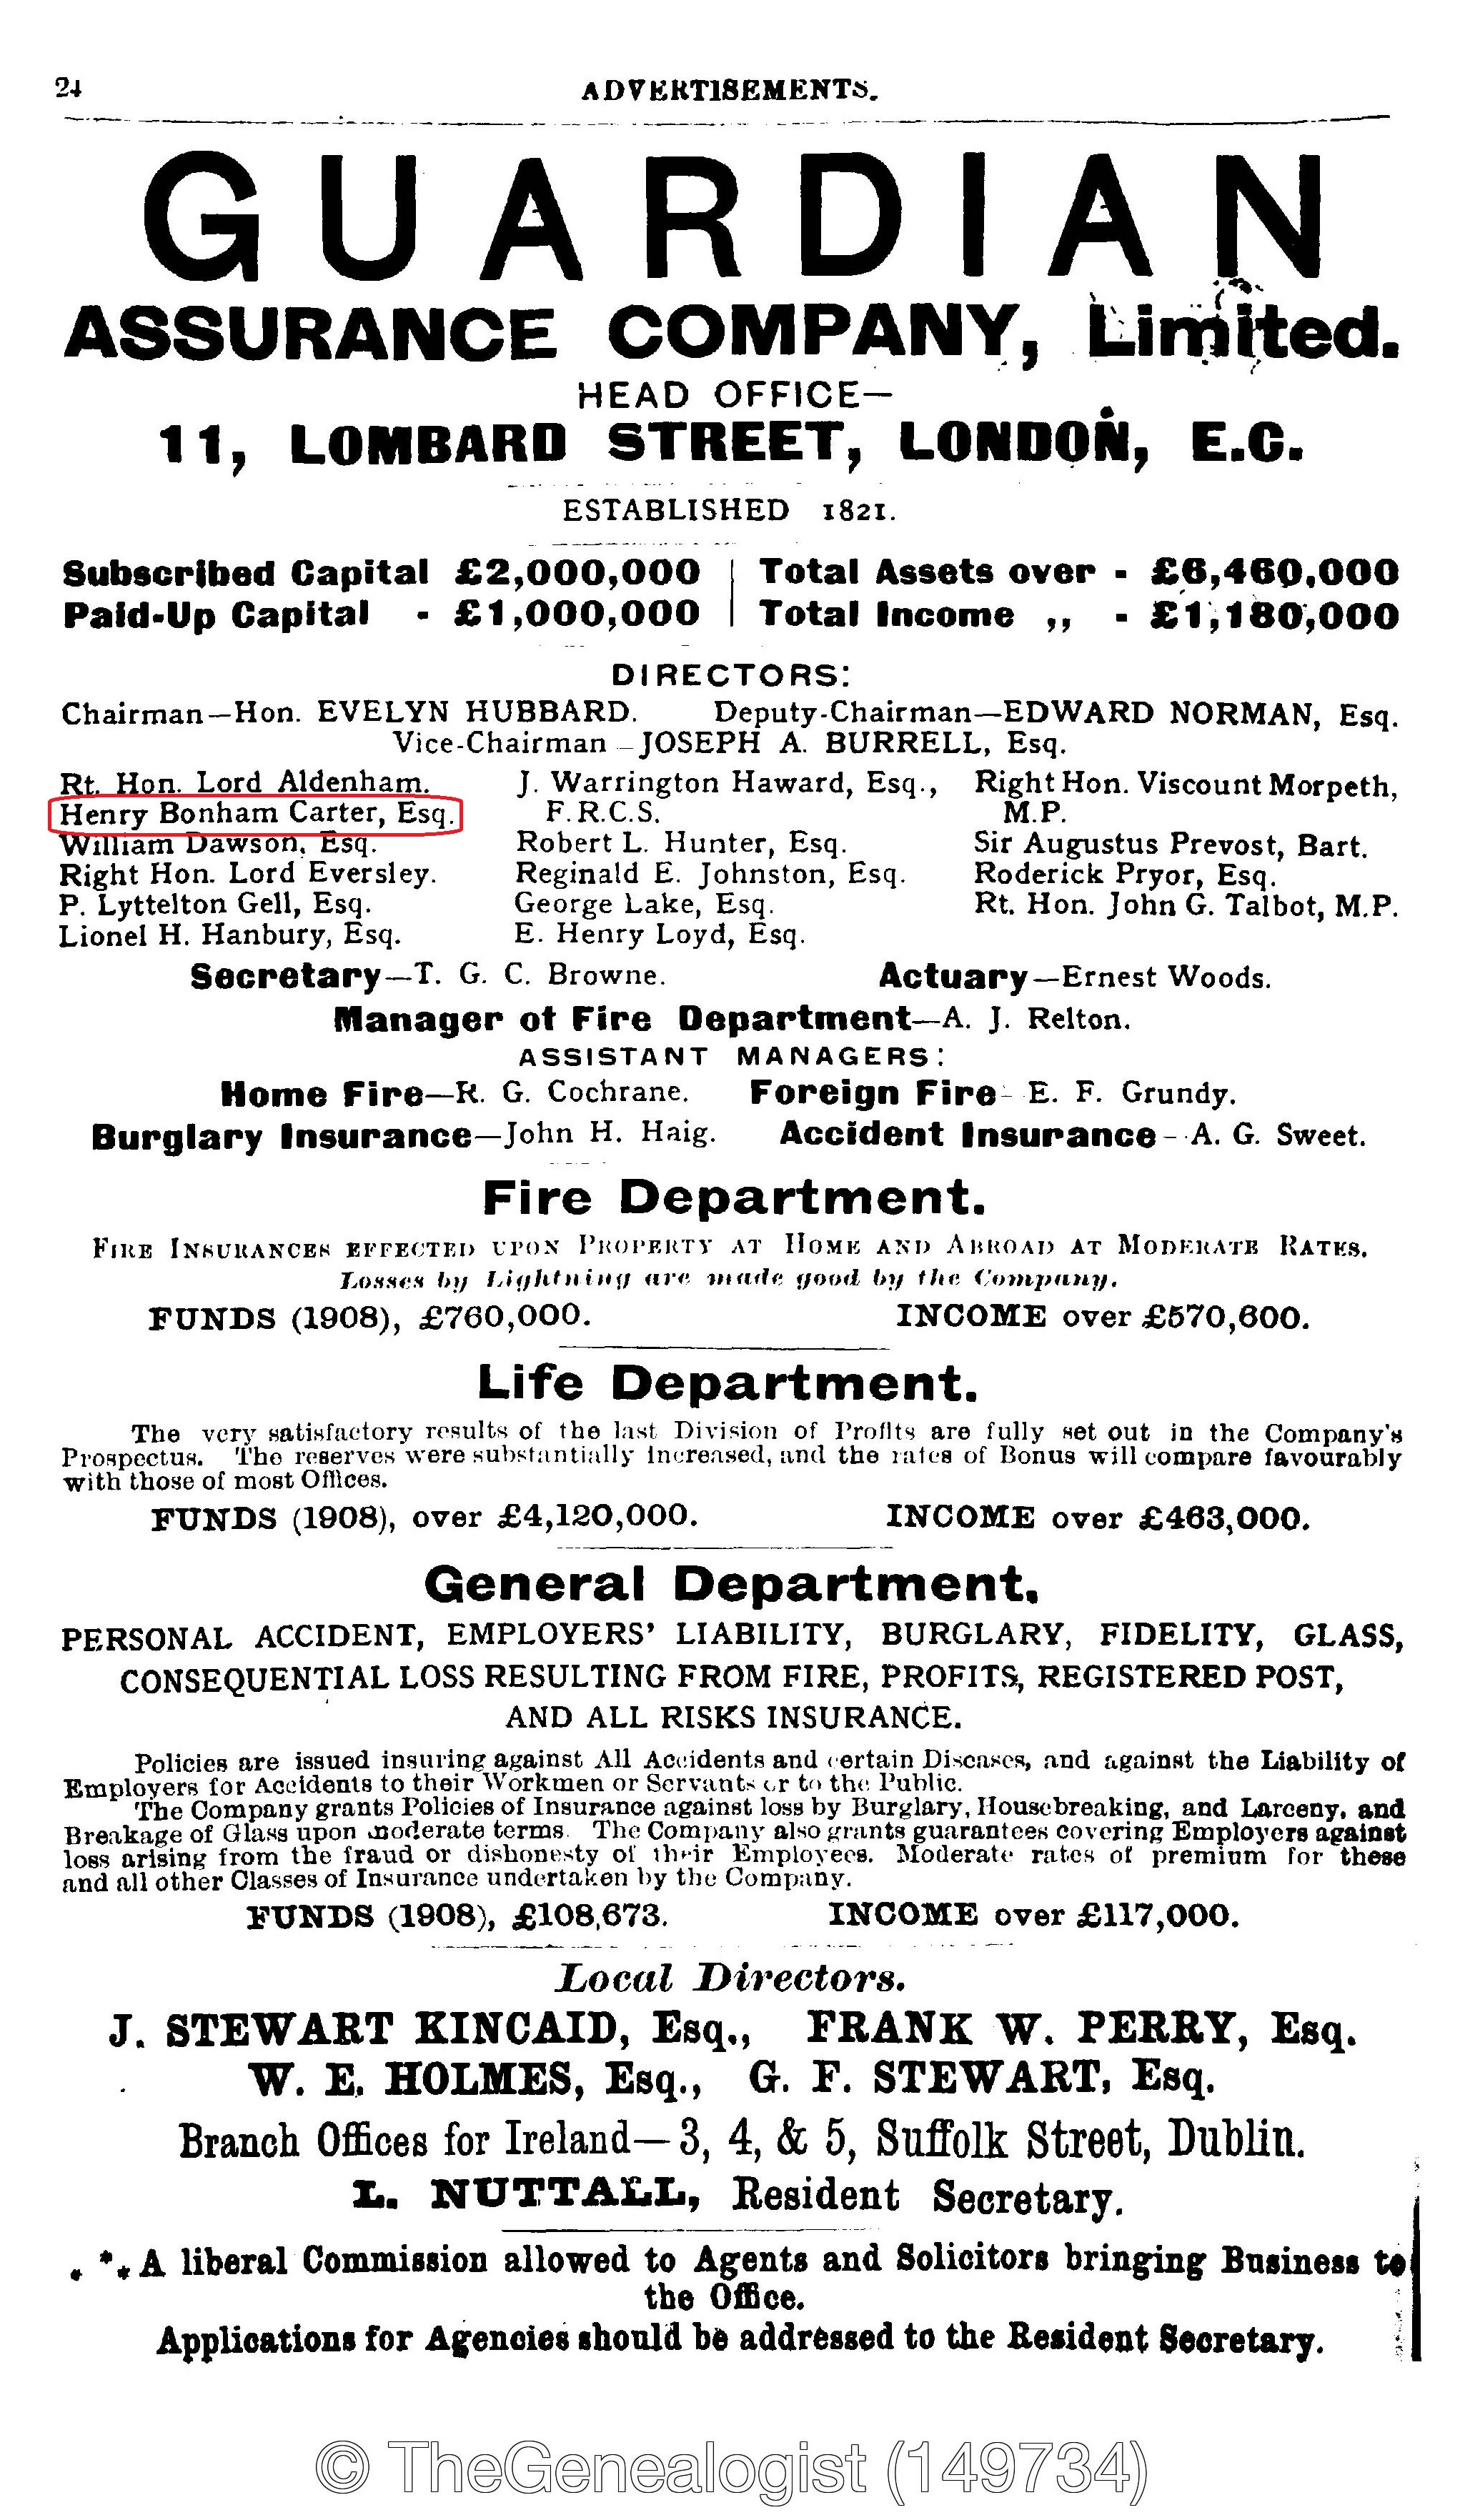 The advertisement appears in a number of Trade, Residential and Telephone Directories on TheGenealogist